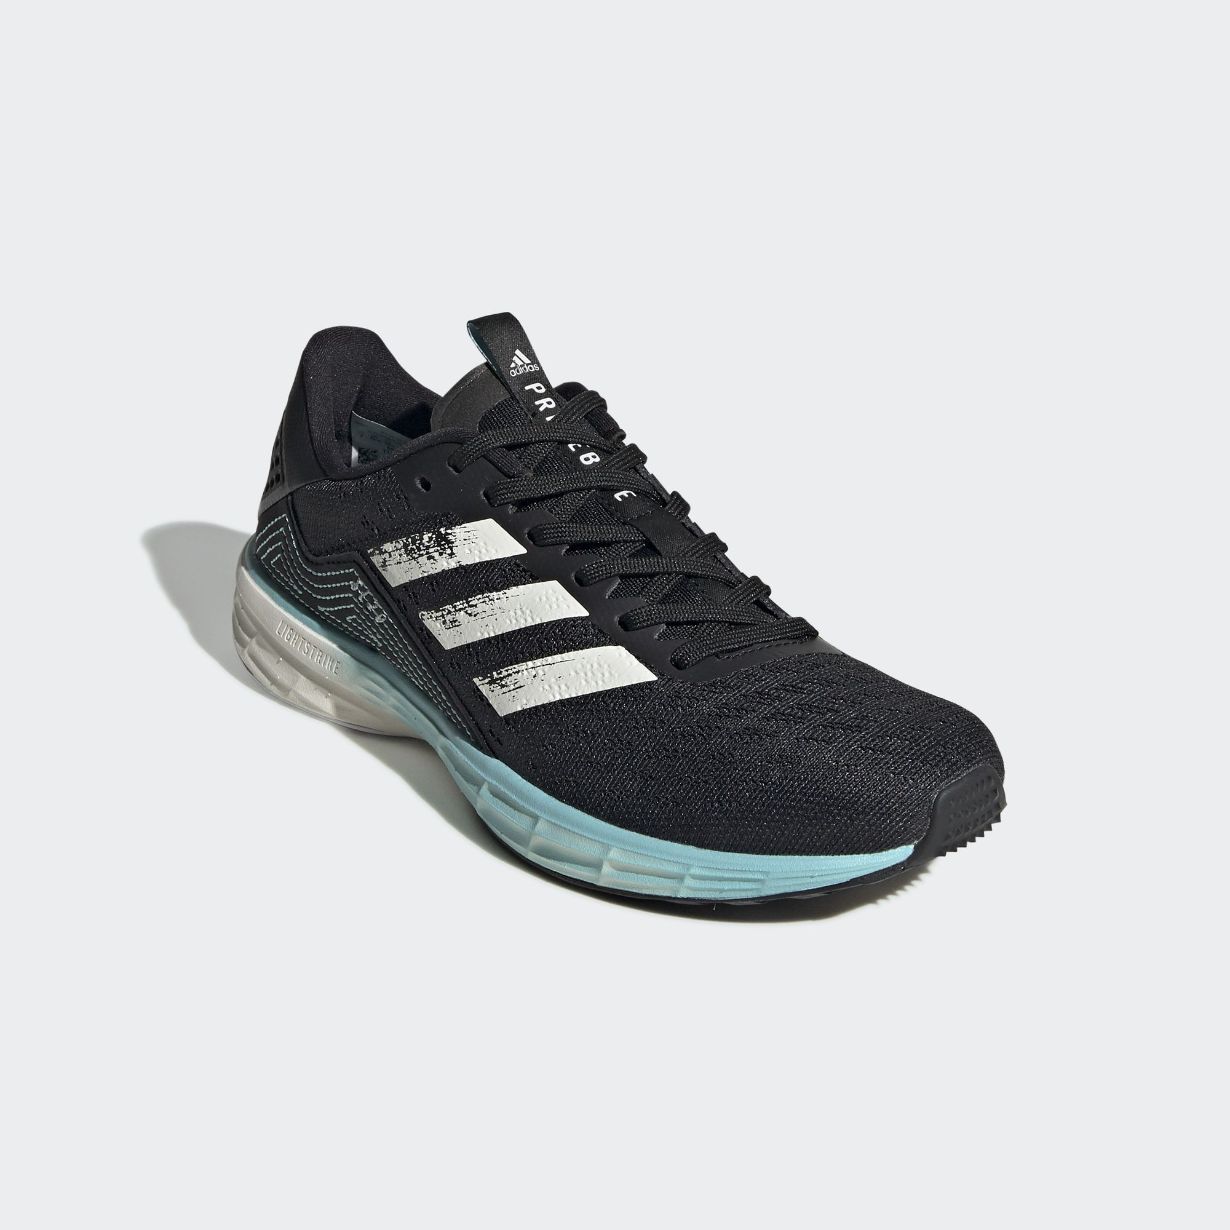 adidas primeblue shoes best women running shoes